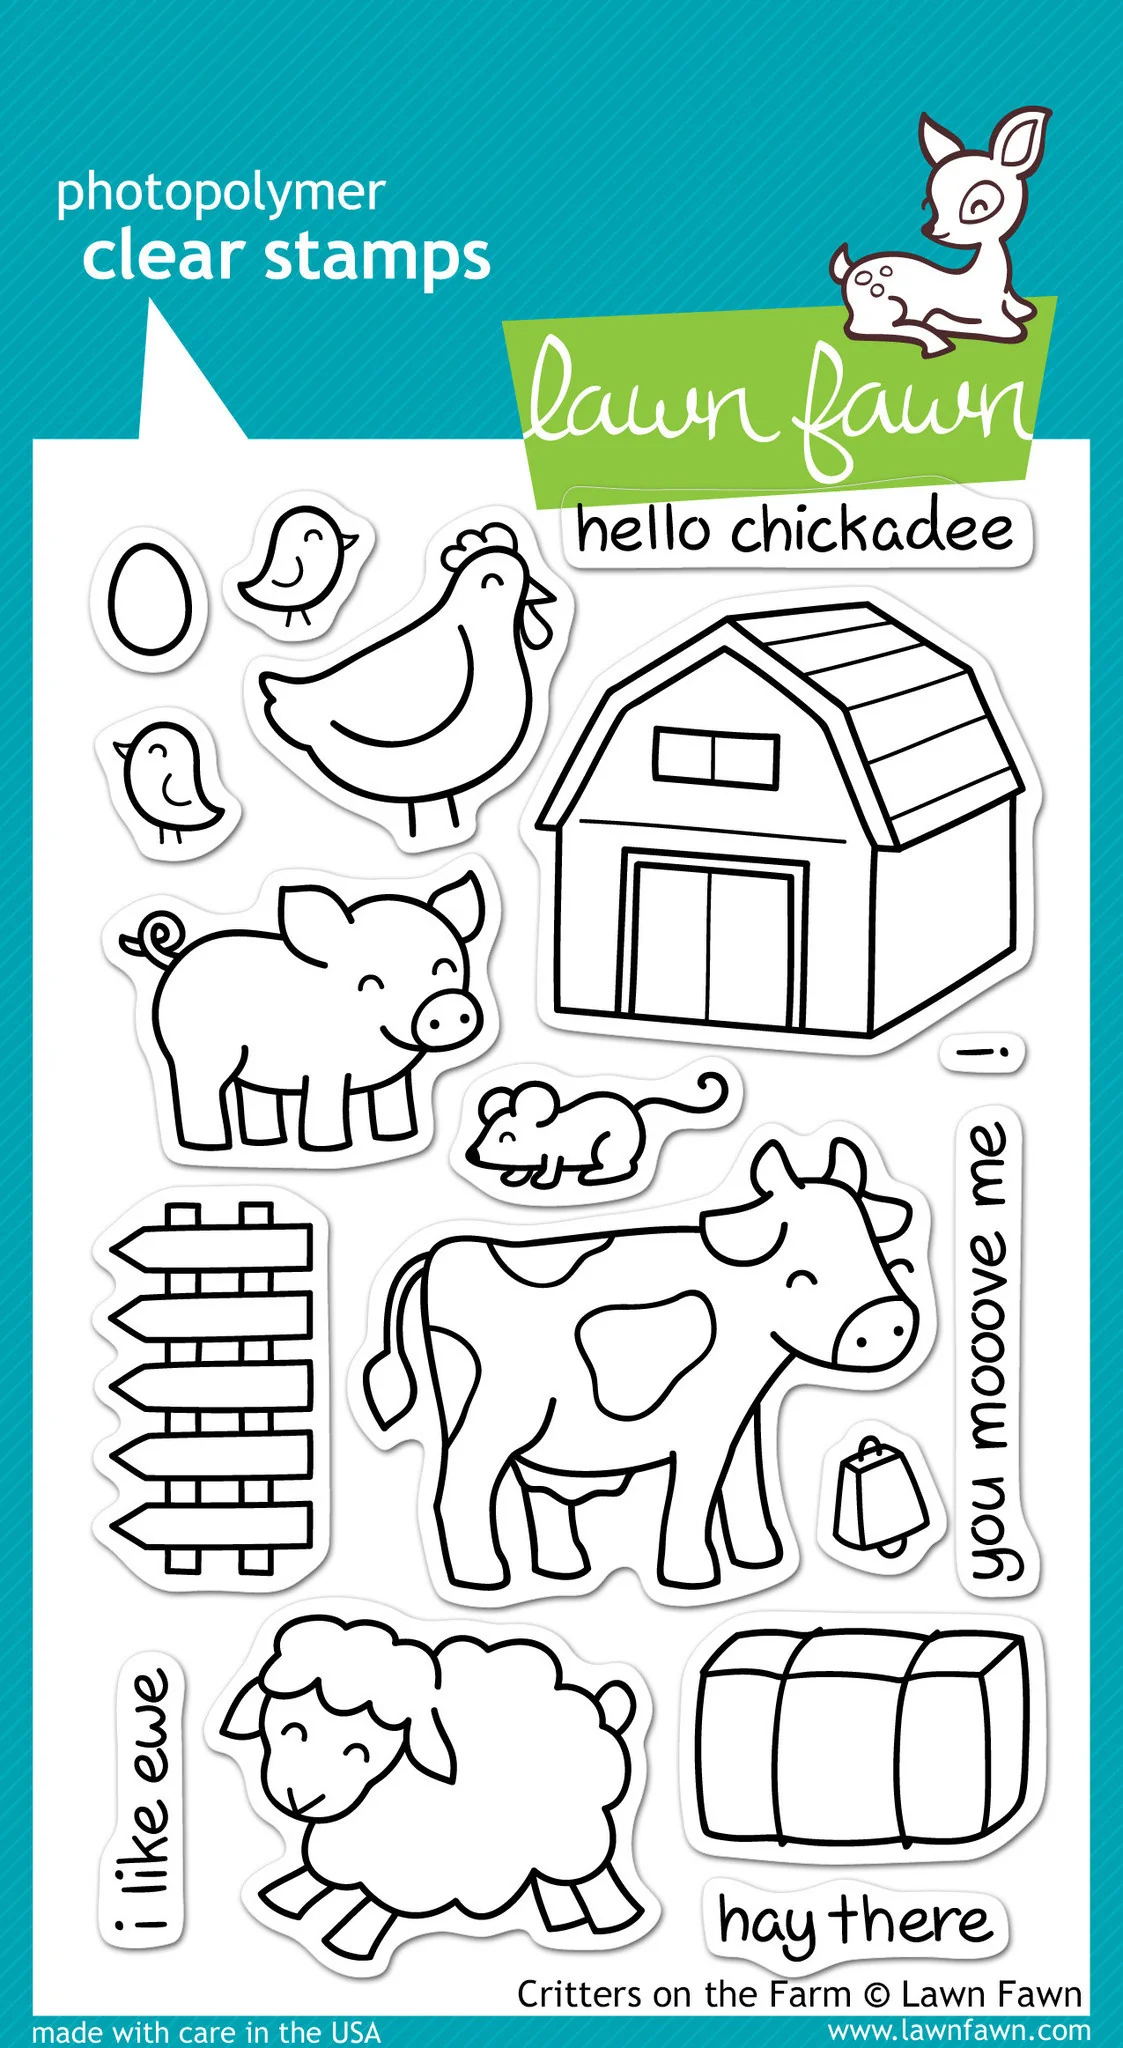 Critters on the Farm stamps